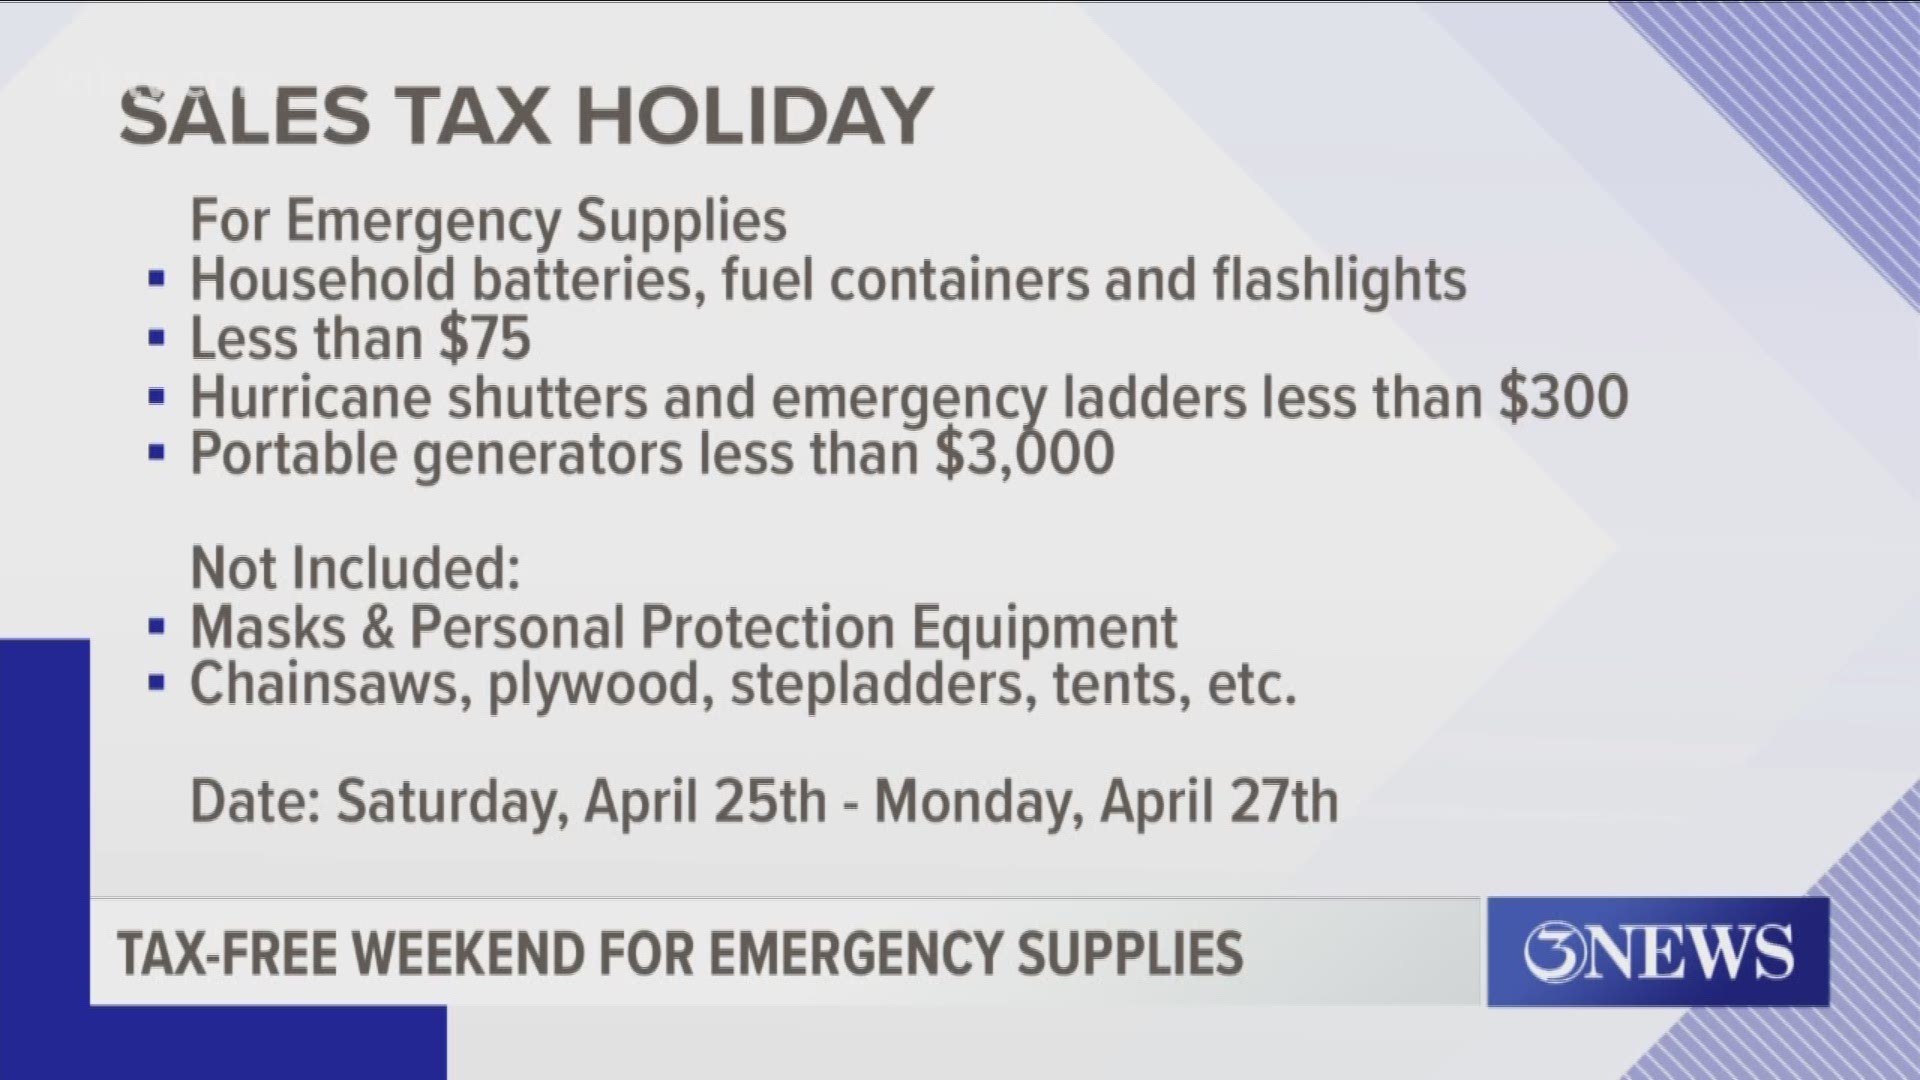 LIST: These emergency supplies qualify for tax exemption from